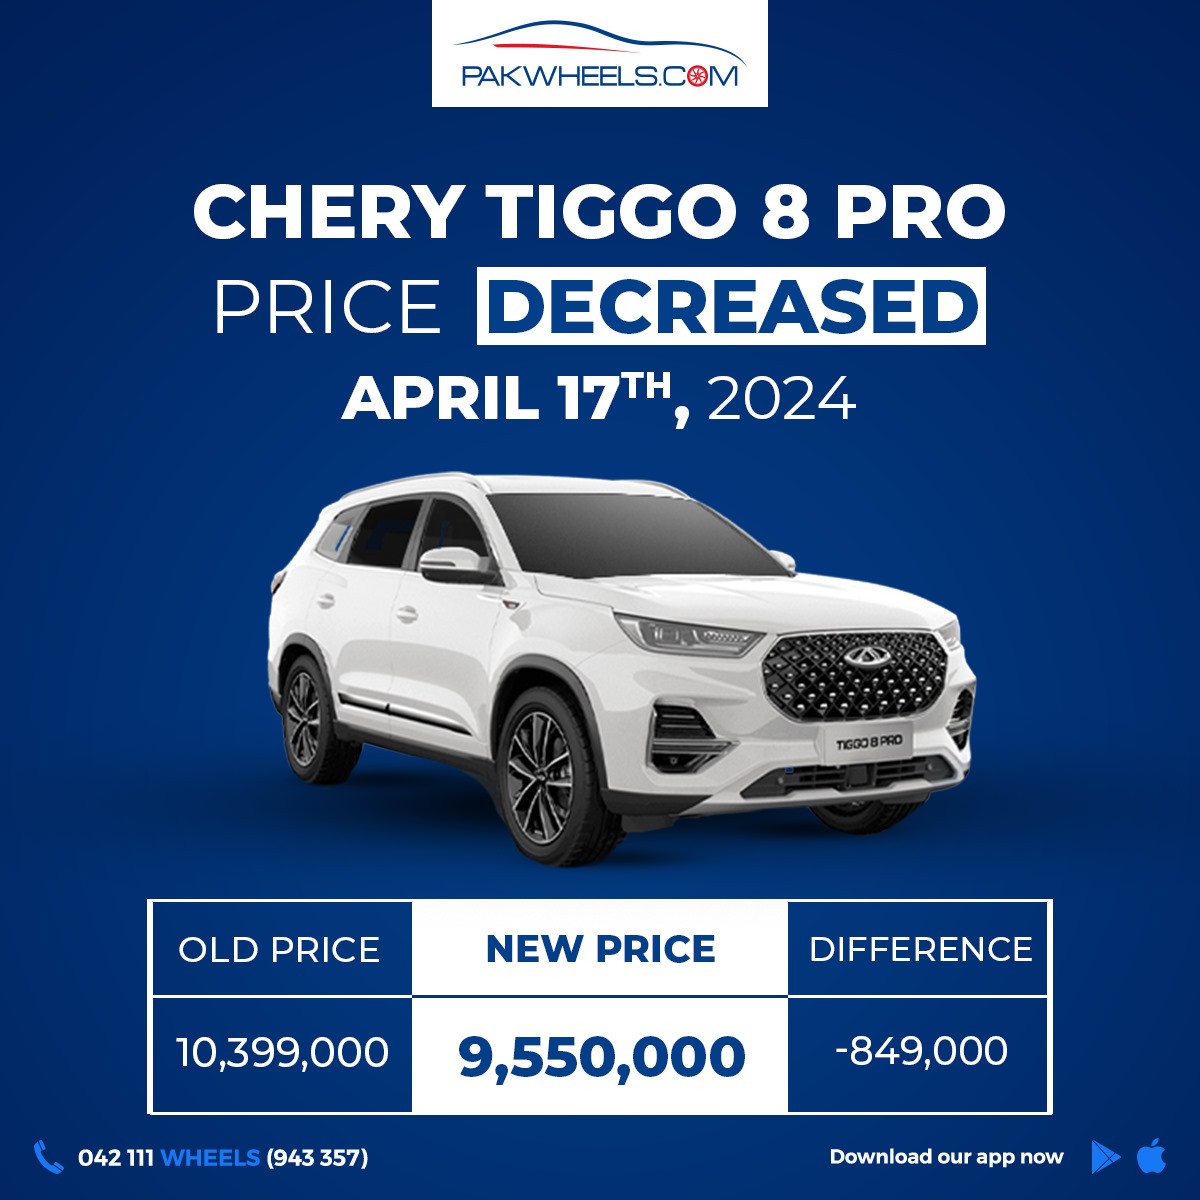 Just In‼️ Chery Tiggo 8 pro’s price reduced by Rs 849,000 🤯 Drop your reactions! 

Read the blog: ow.ly/SUrz50Rqrah

#chery #cherytiggo #cherytiggo8pro #price #pakwheels